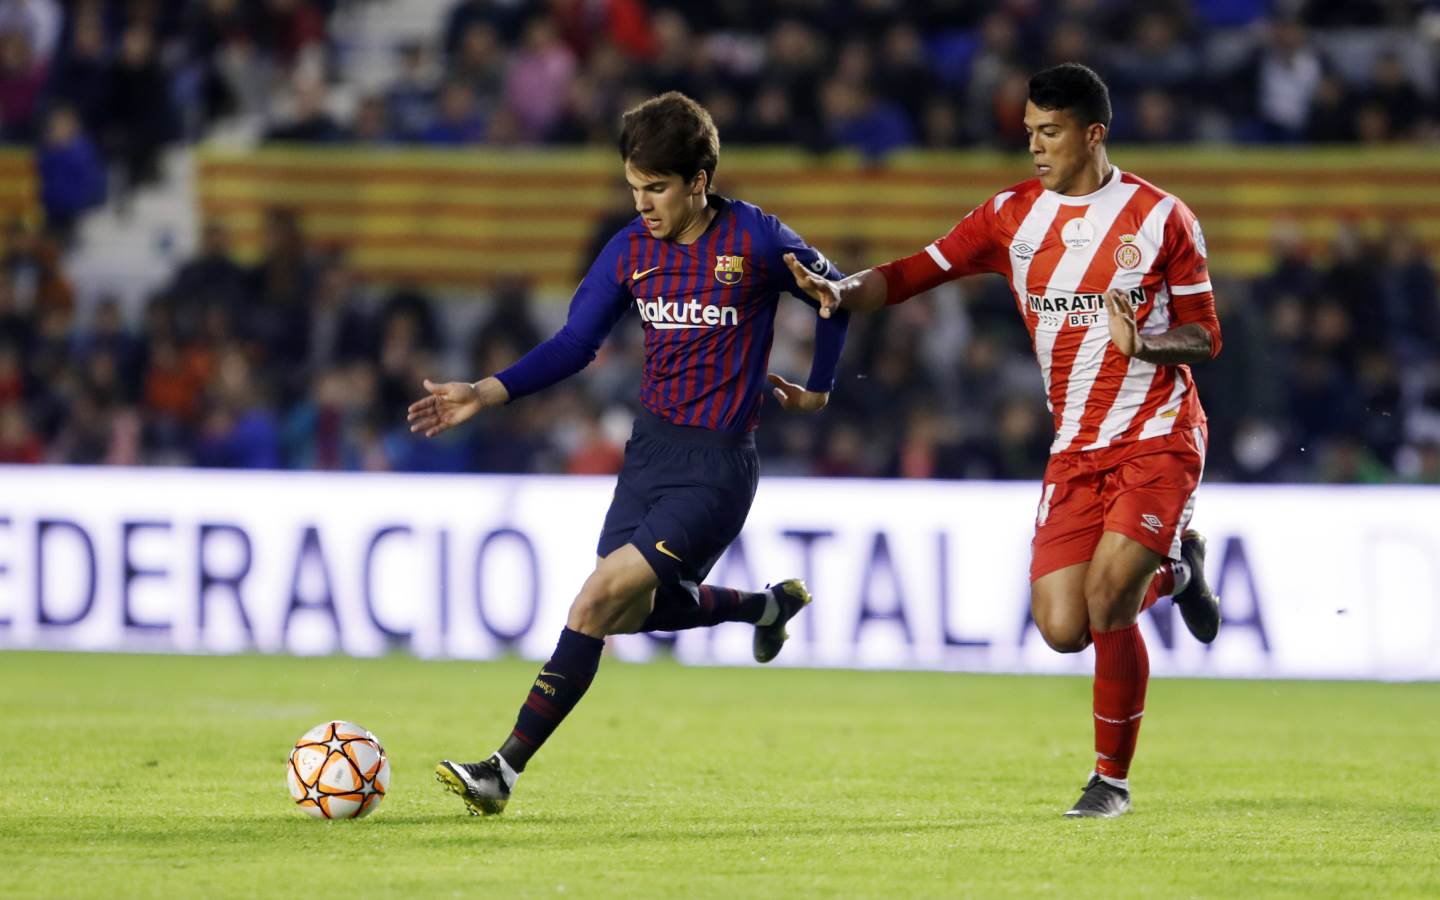 Riqui Puig puts on a show in the Catalan Super Cup